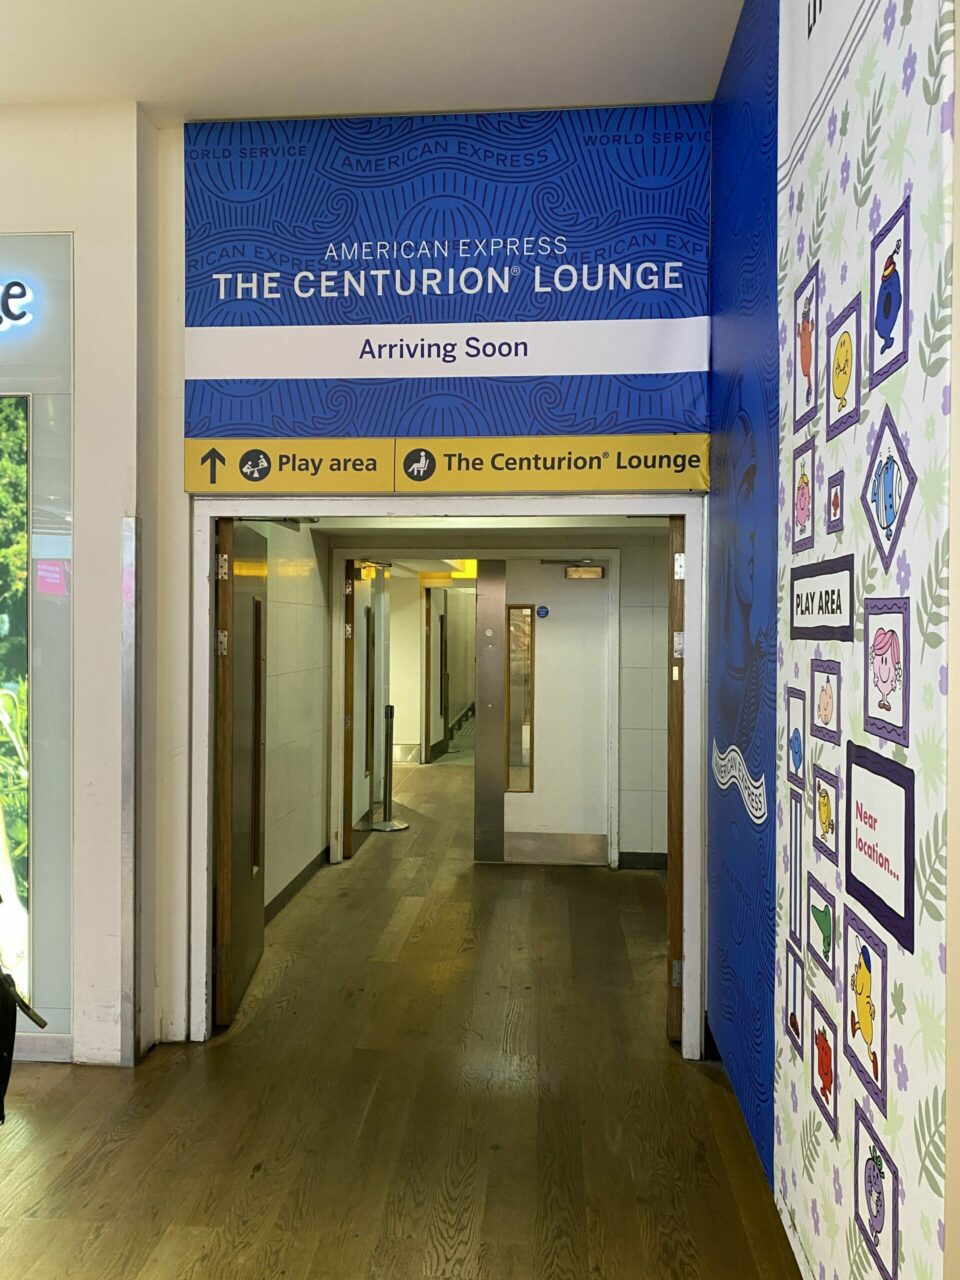 American Express New Centurion Lounge entrance 